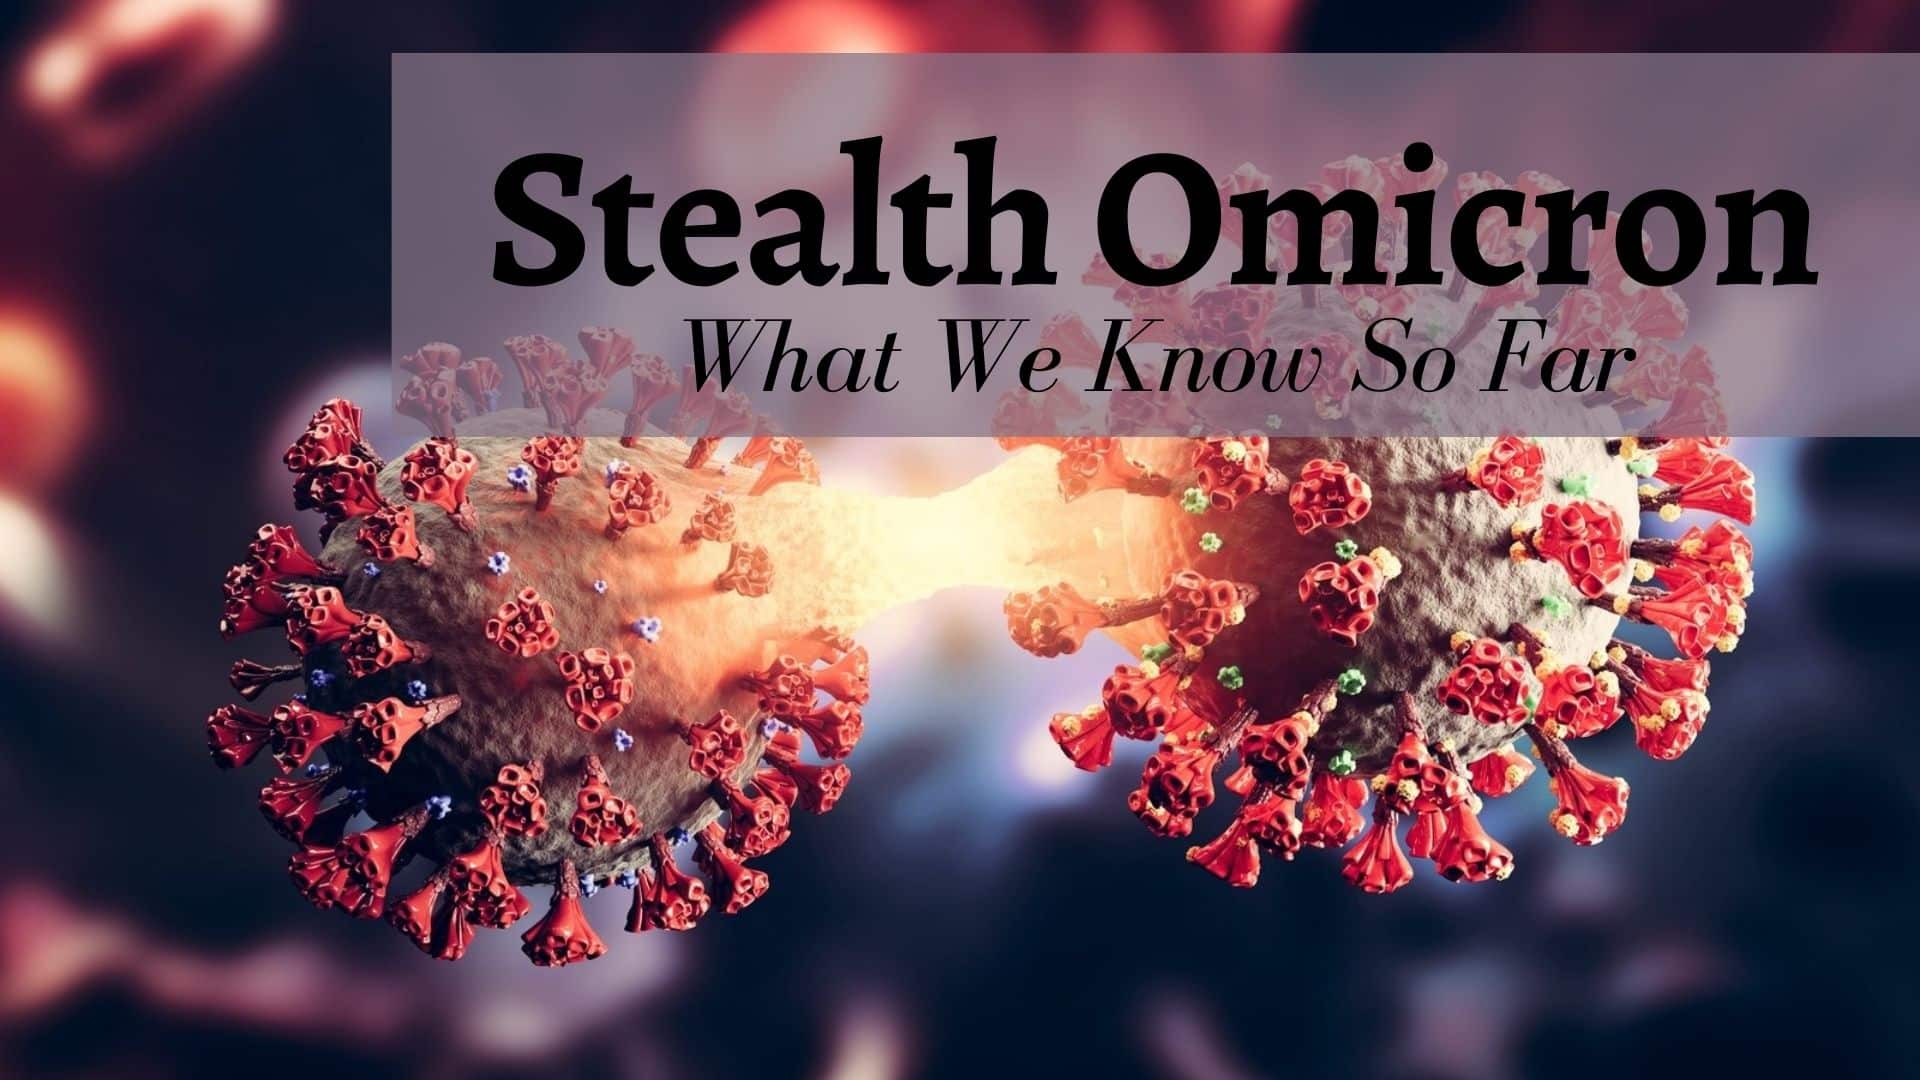 New Omicron Subvariant BA.2 Reaches US: Is It More Contagious? What We Know About The Stealth Omicron